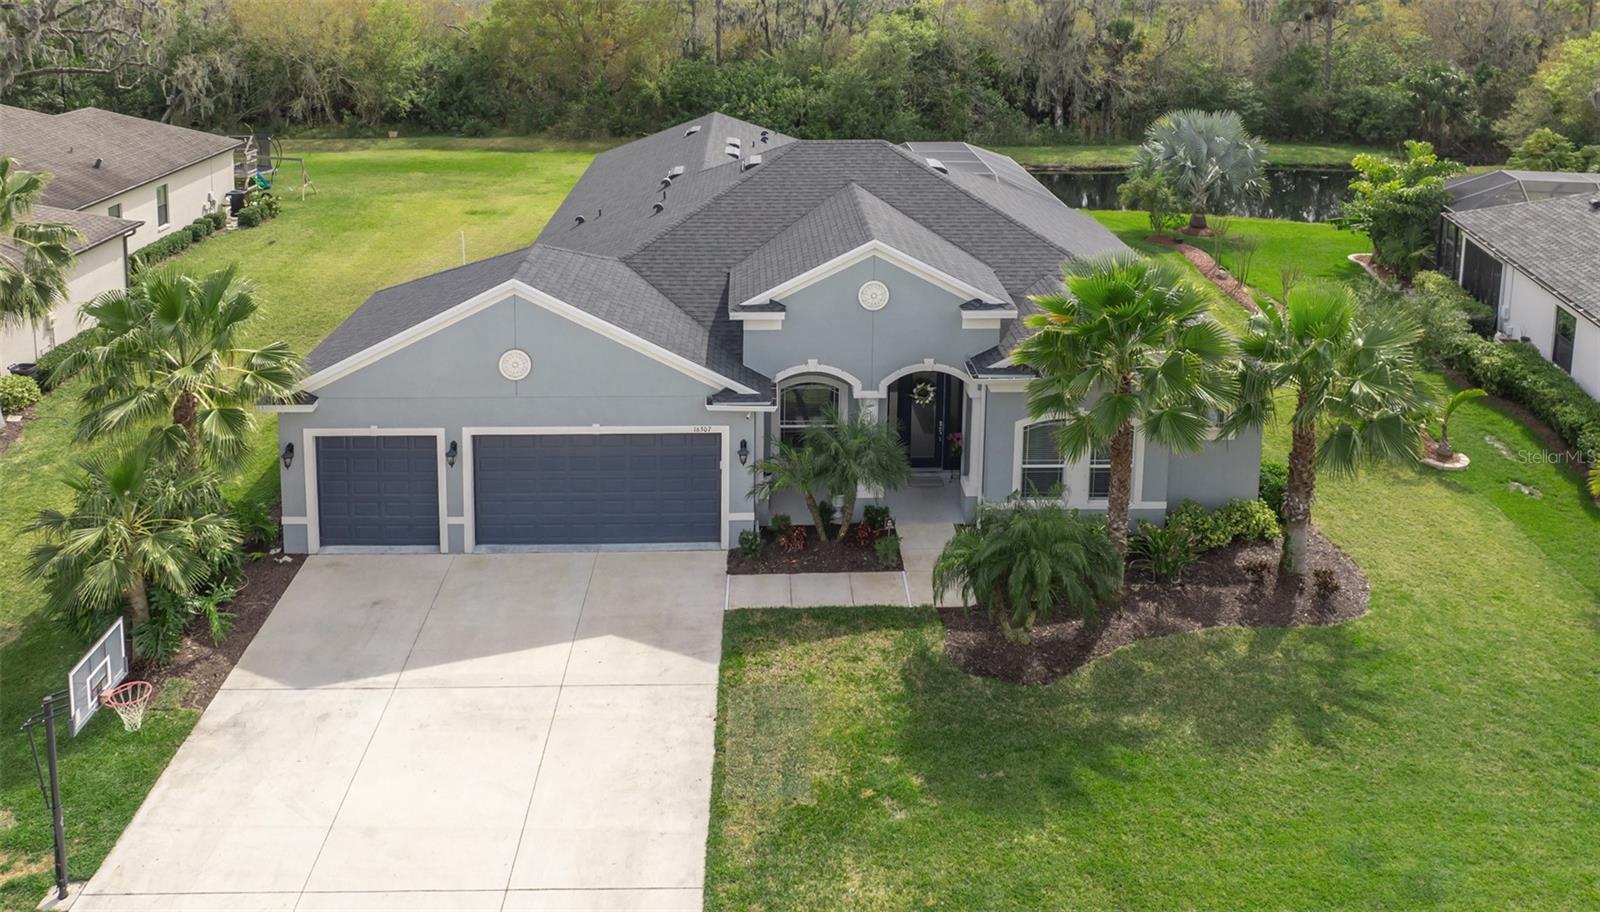 Photo one of 16307 29Th E Ct Parrish FL 34219 | MLS A4602645